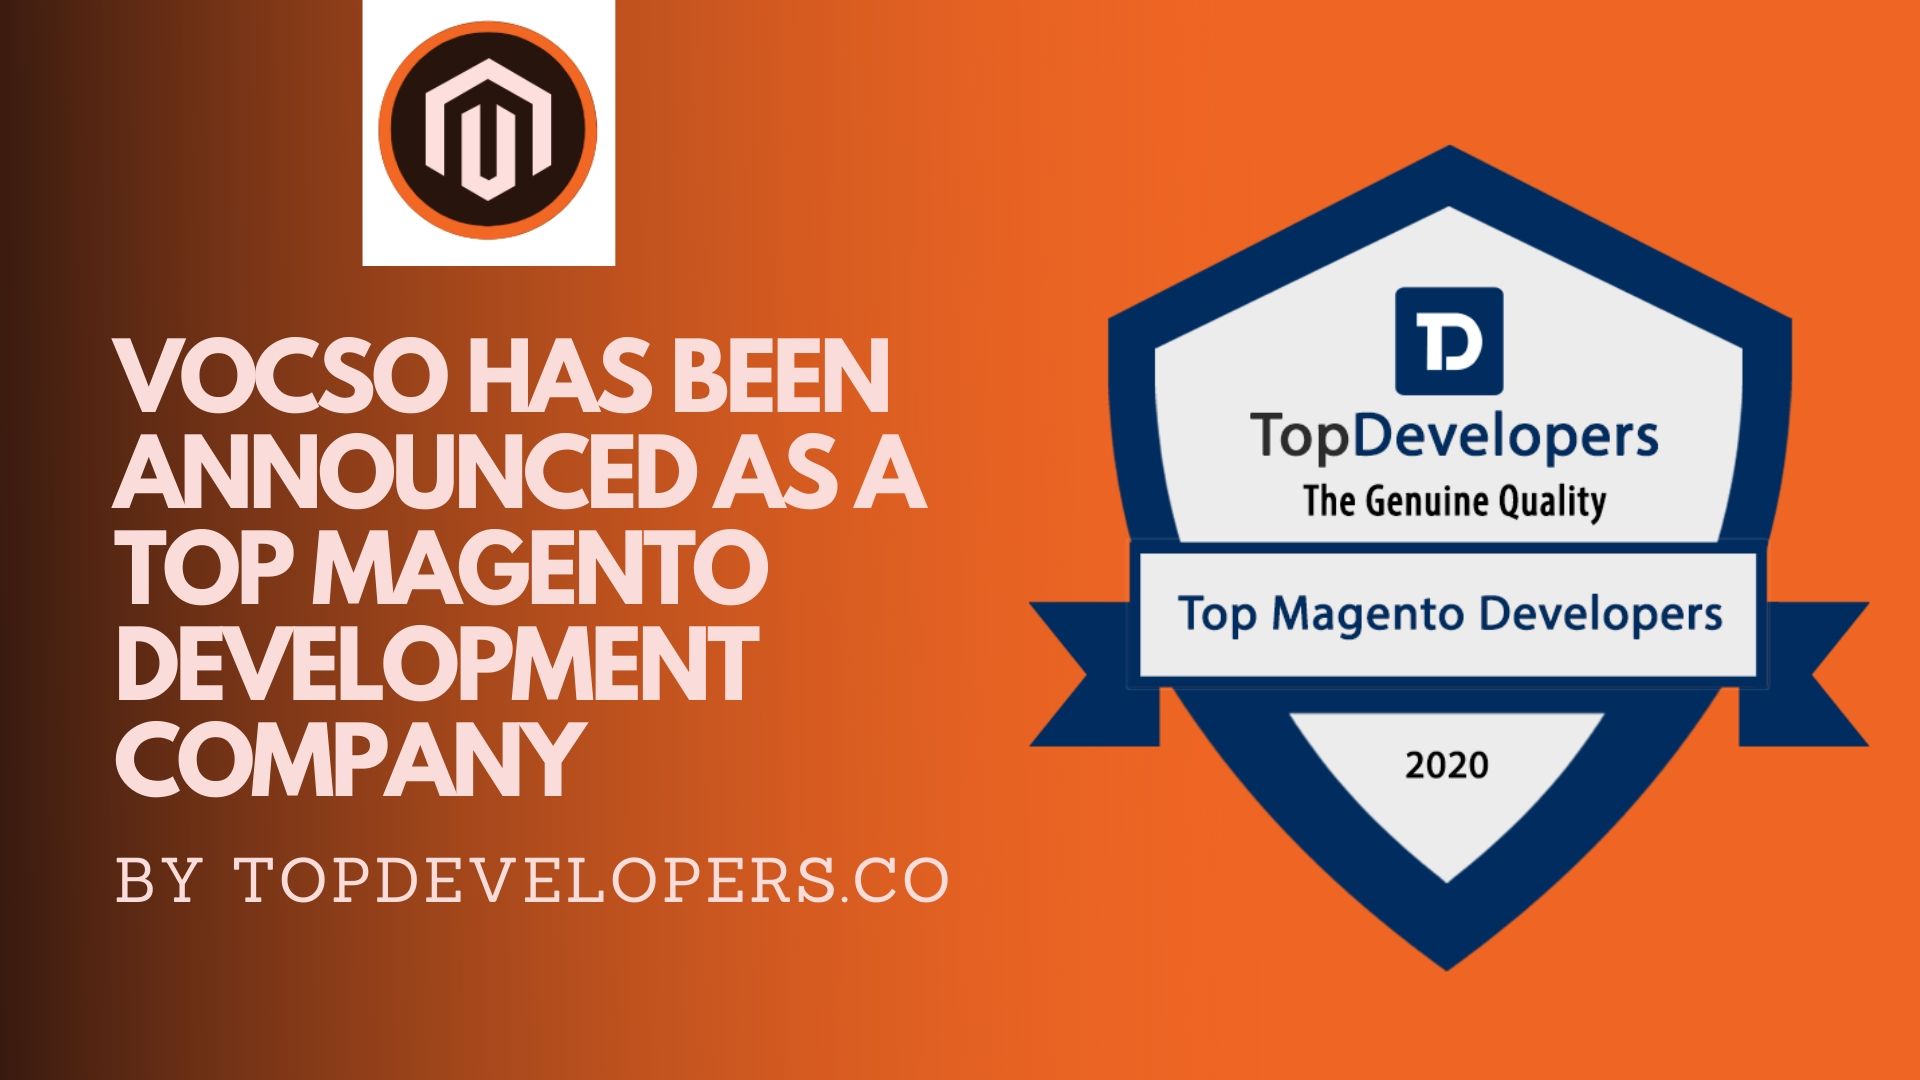 VOCSO Has Been Announced As A Top Magento Development Company